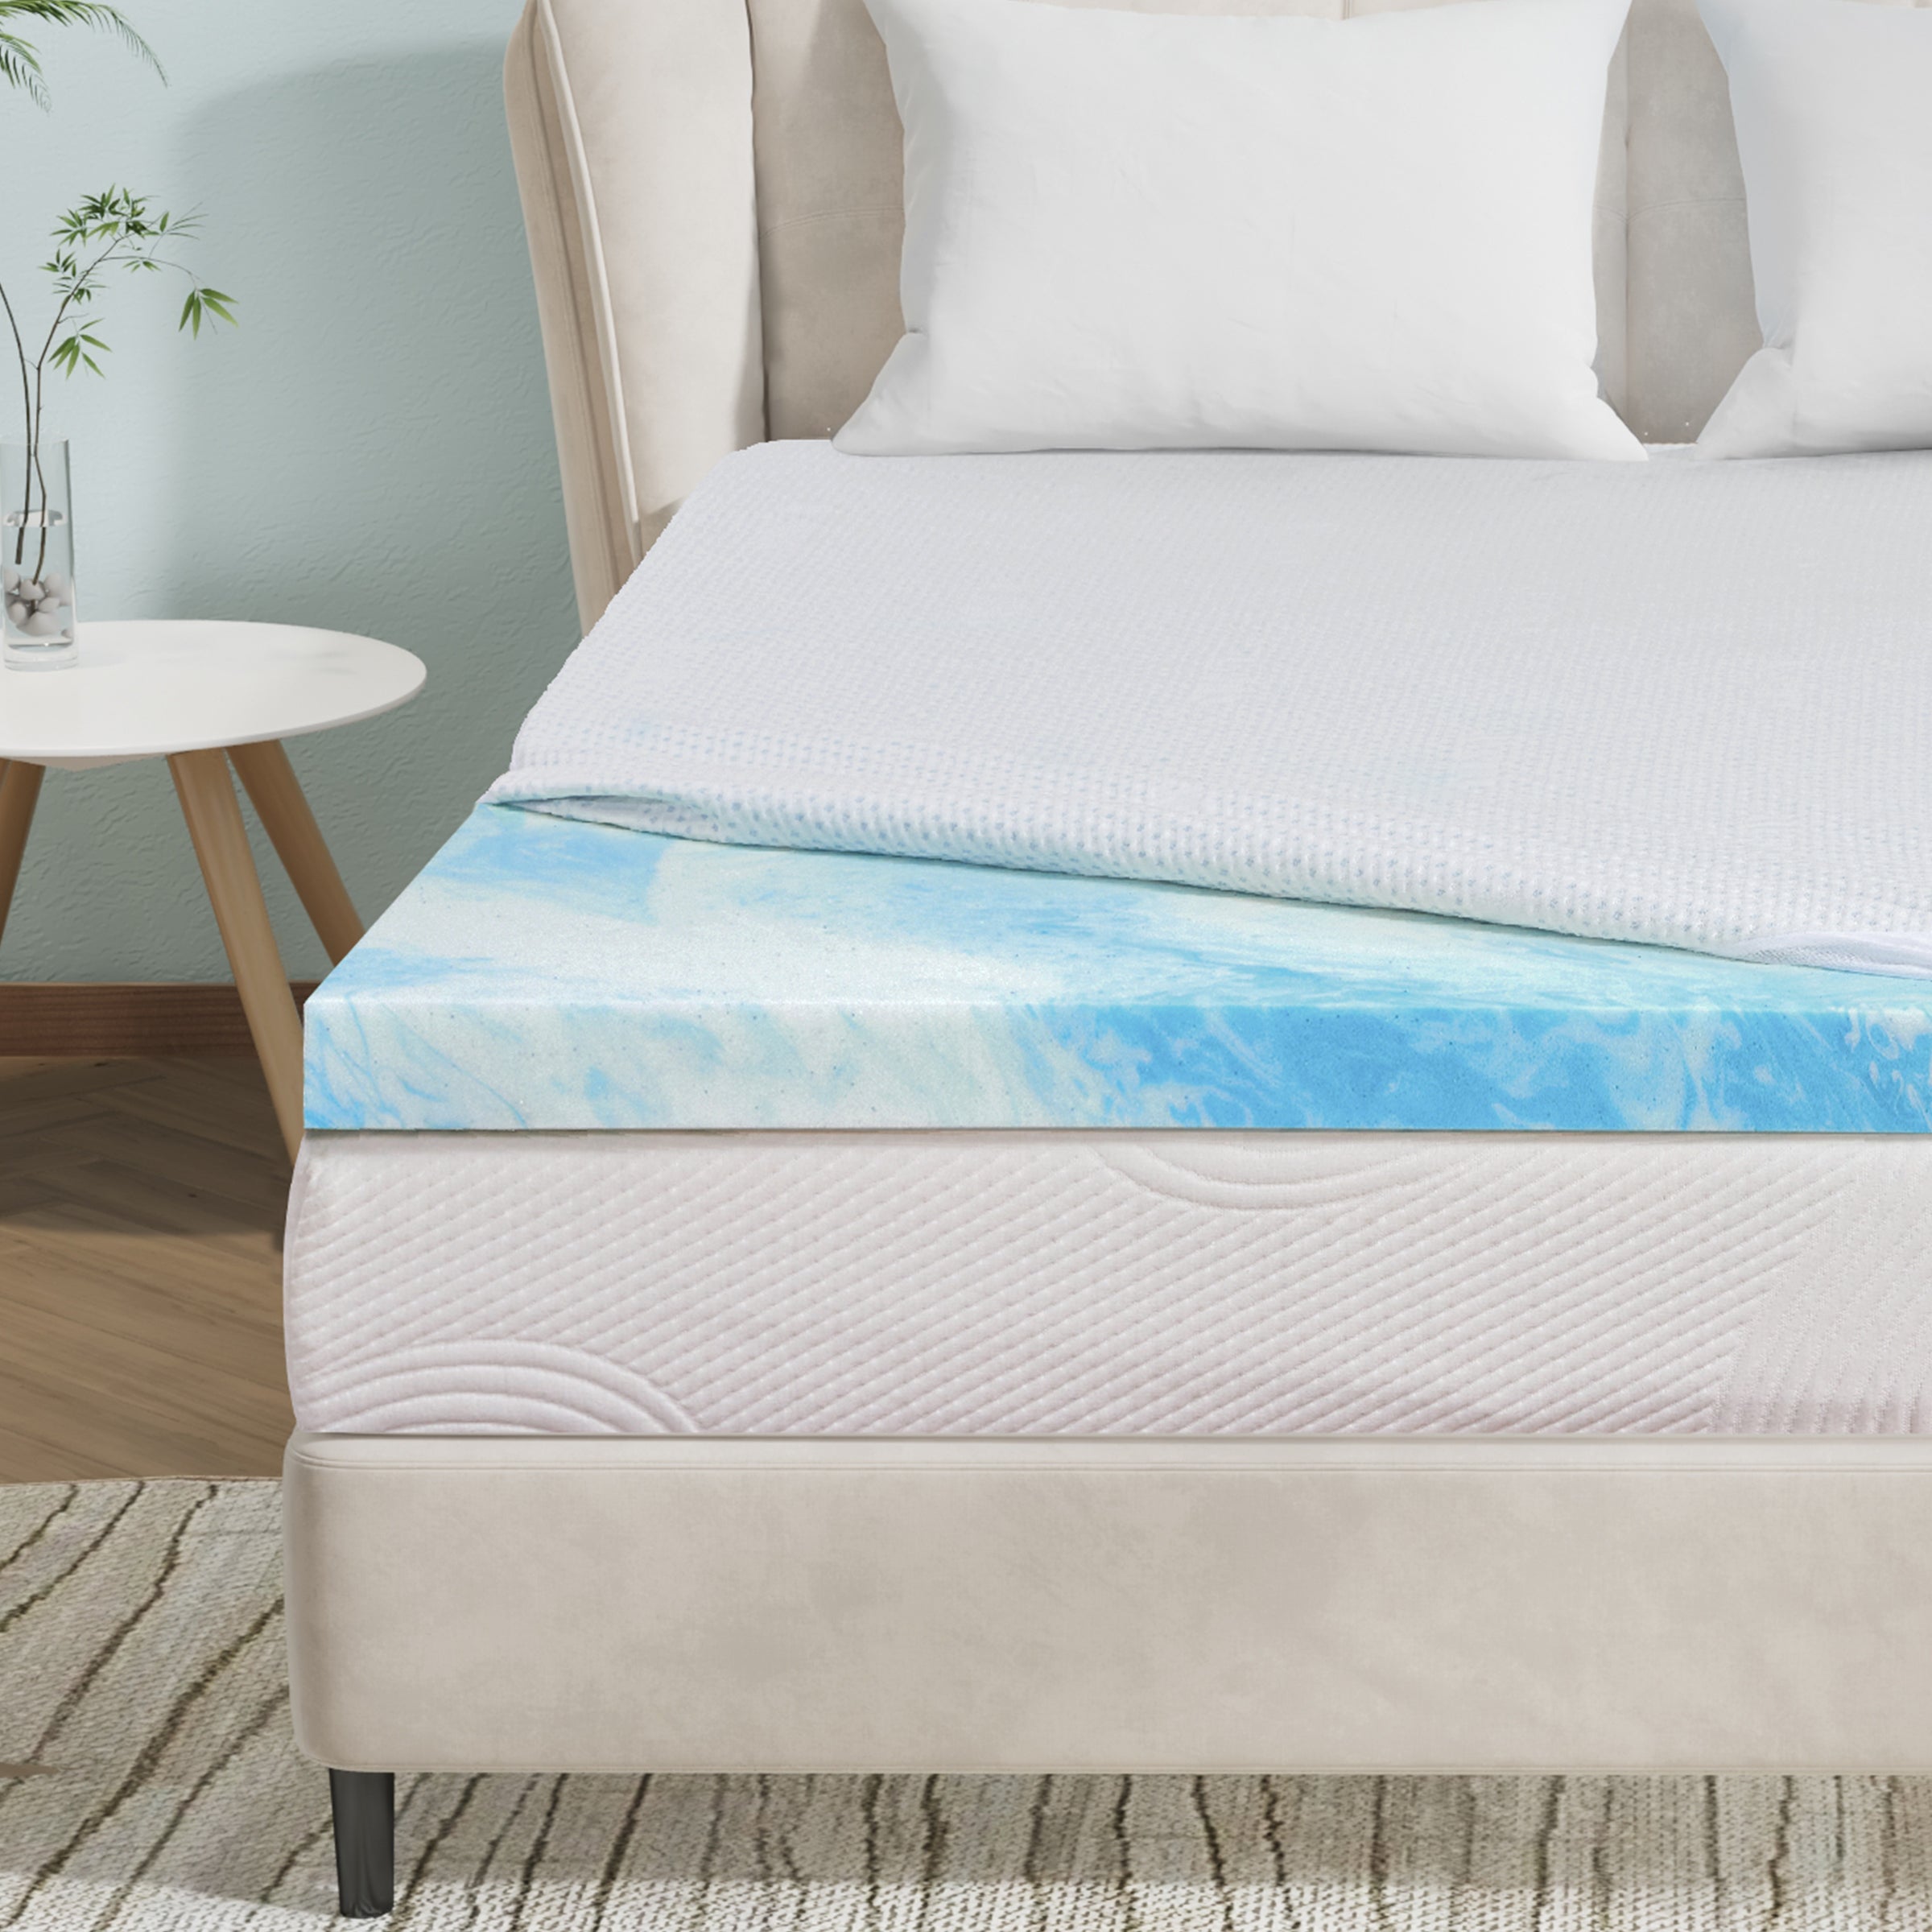 Organic Gel-Infused Foam Mattress Topper (3 inch)<br>【Including A Free Waterproof Cover】